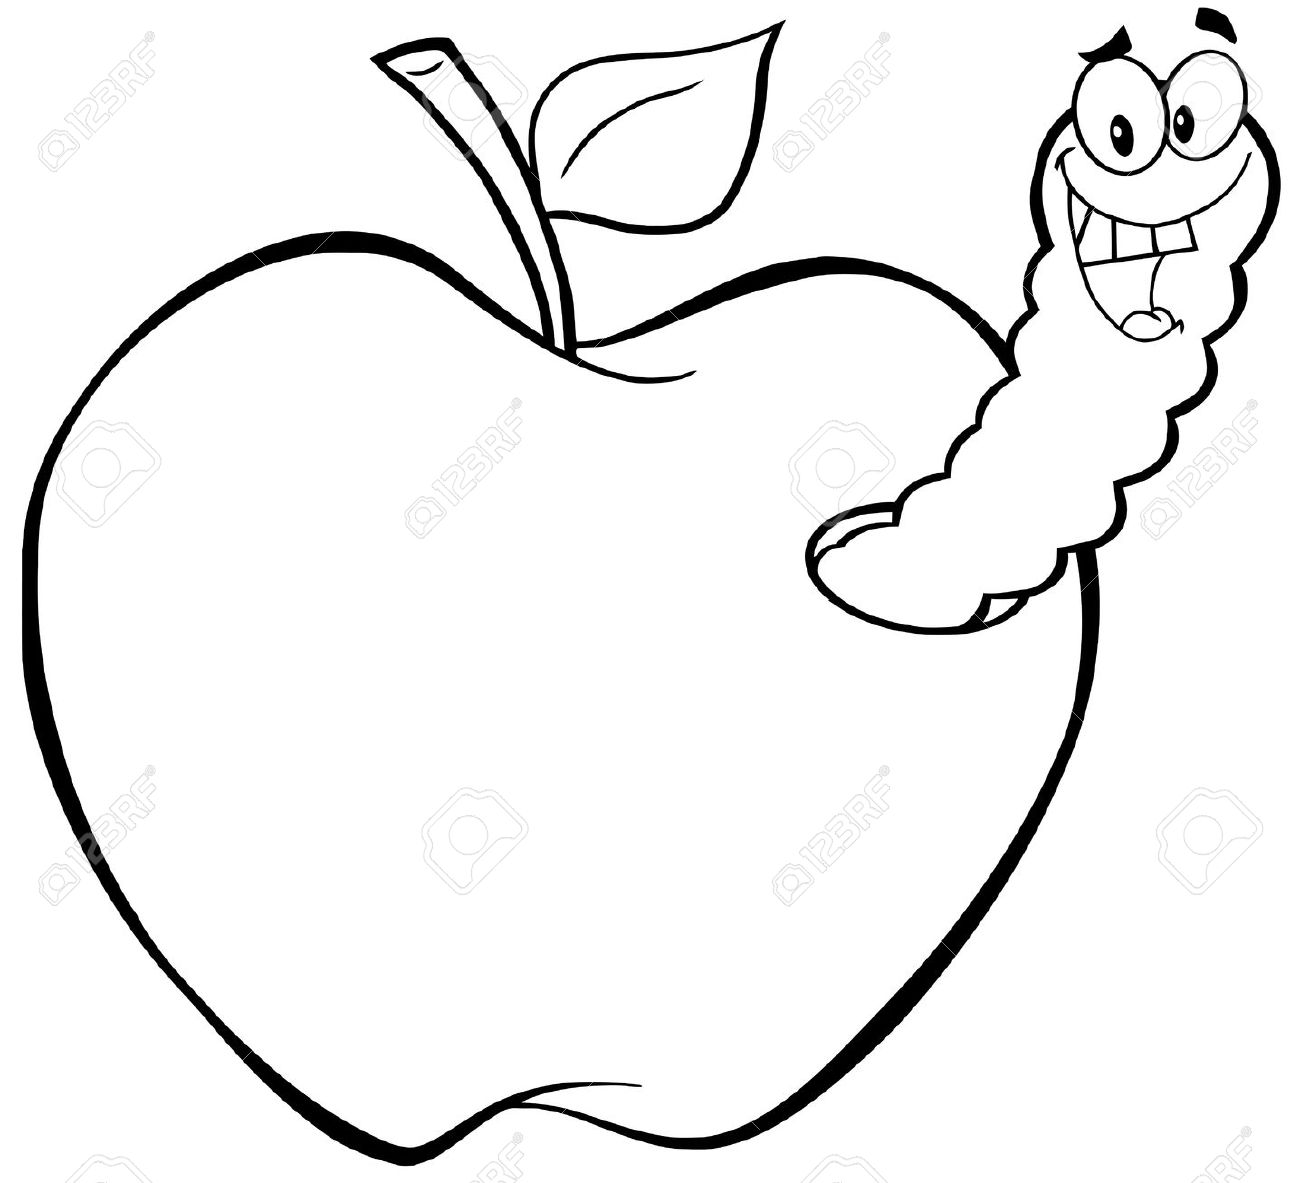 ... Cute worm in apple - isol